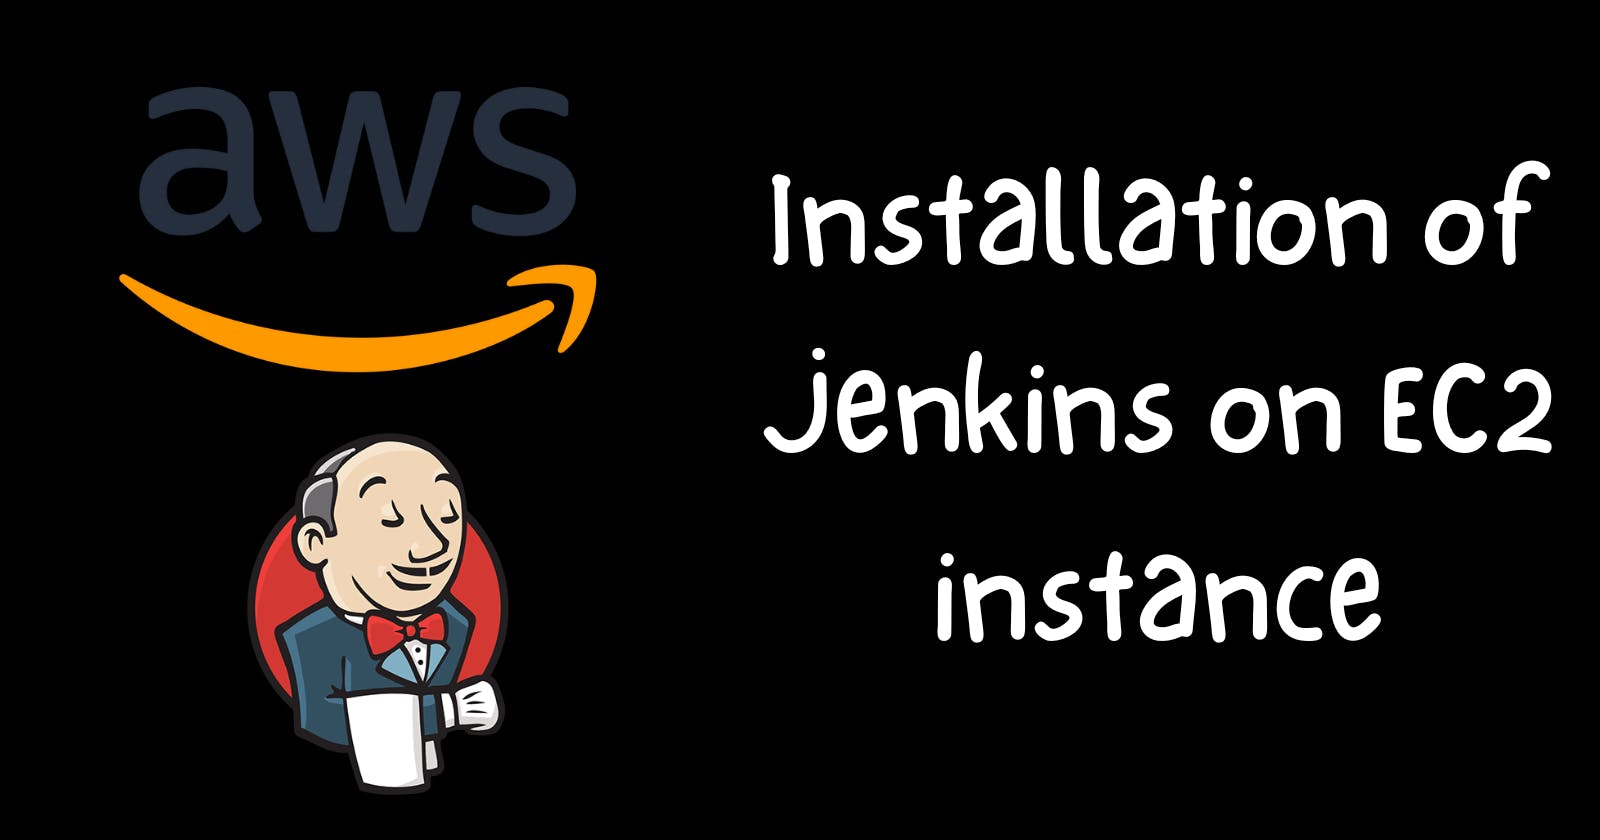 Creating an EC2 Instance and Installing Jenkins